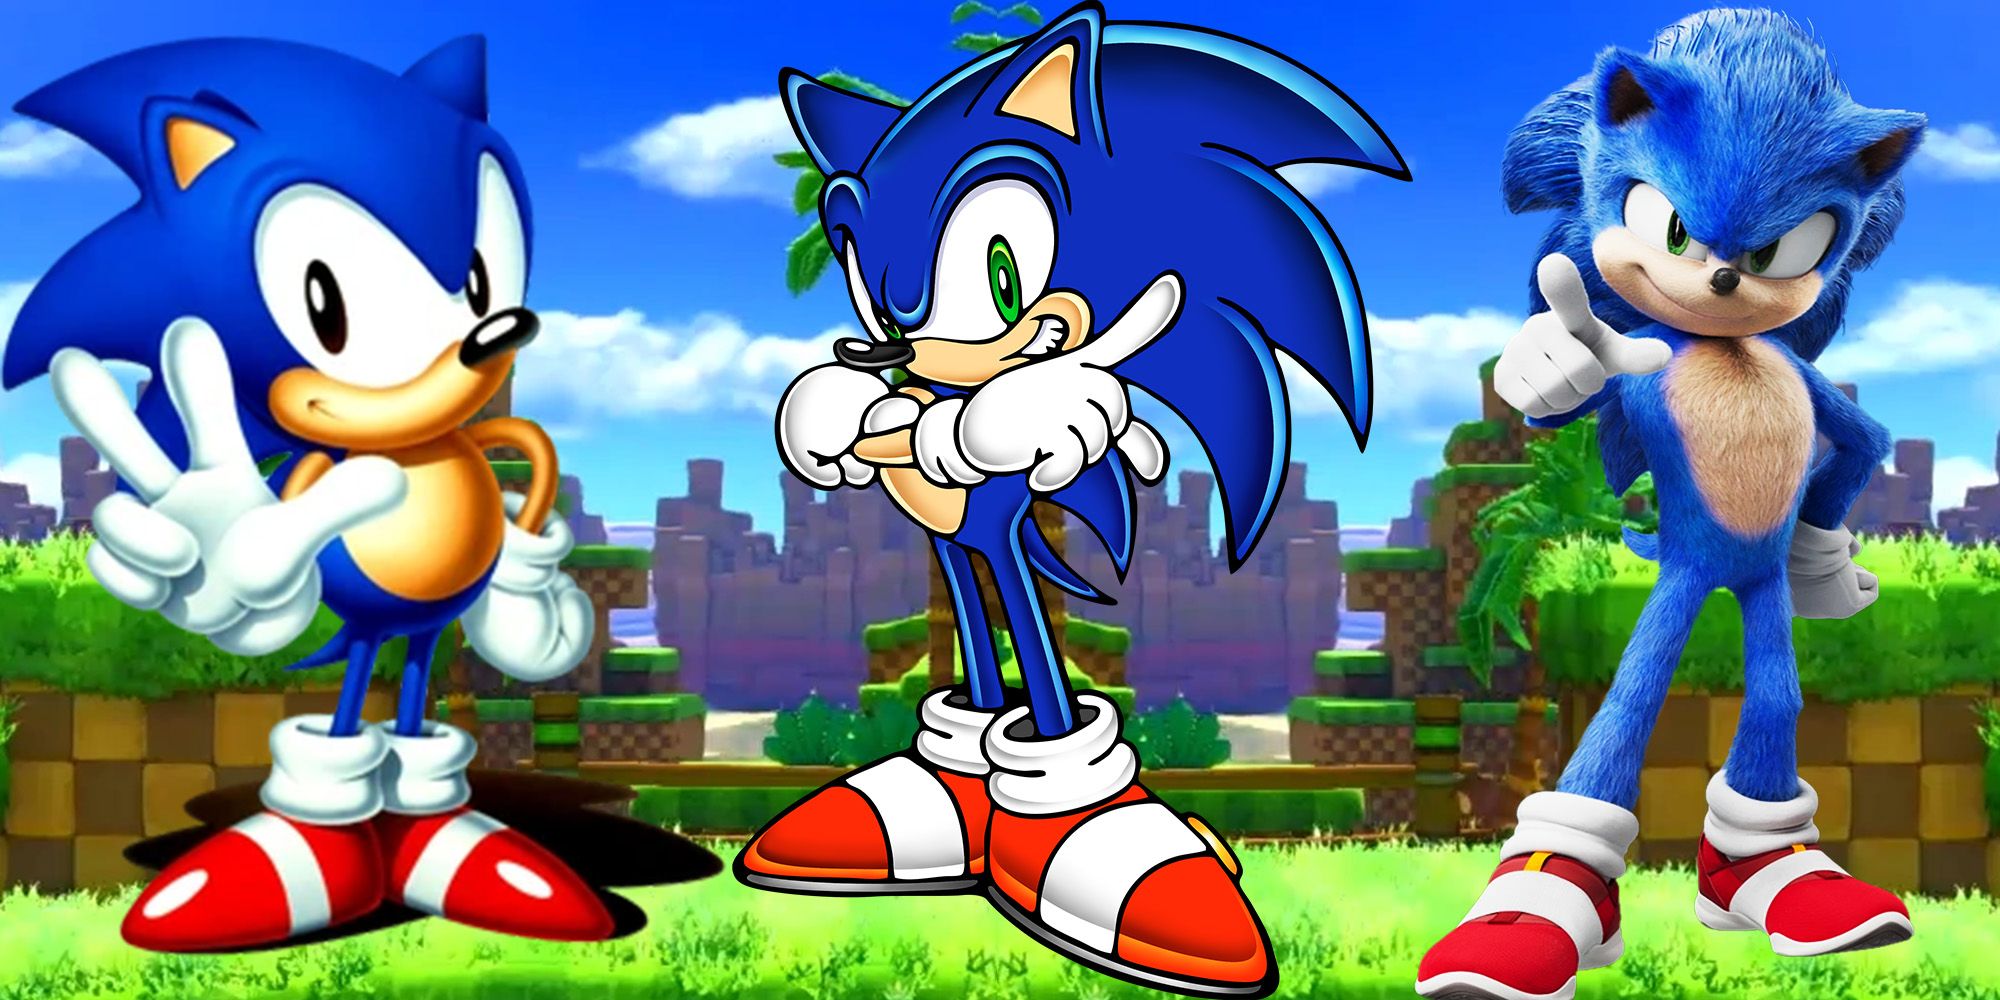 3 versions of Sonic the Hedgehog side by side: Classic, Yuji Uekawa's design for Sonic Adventure, and Movie against backdrop of Green Hill Zone